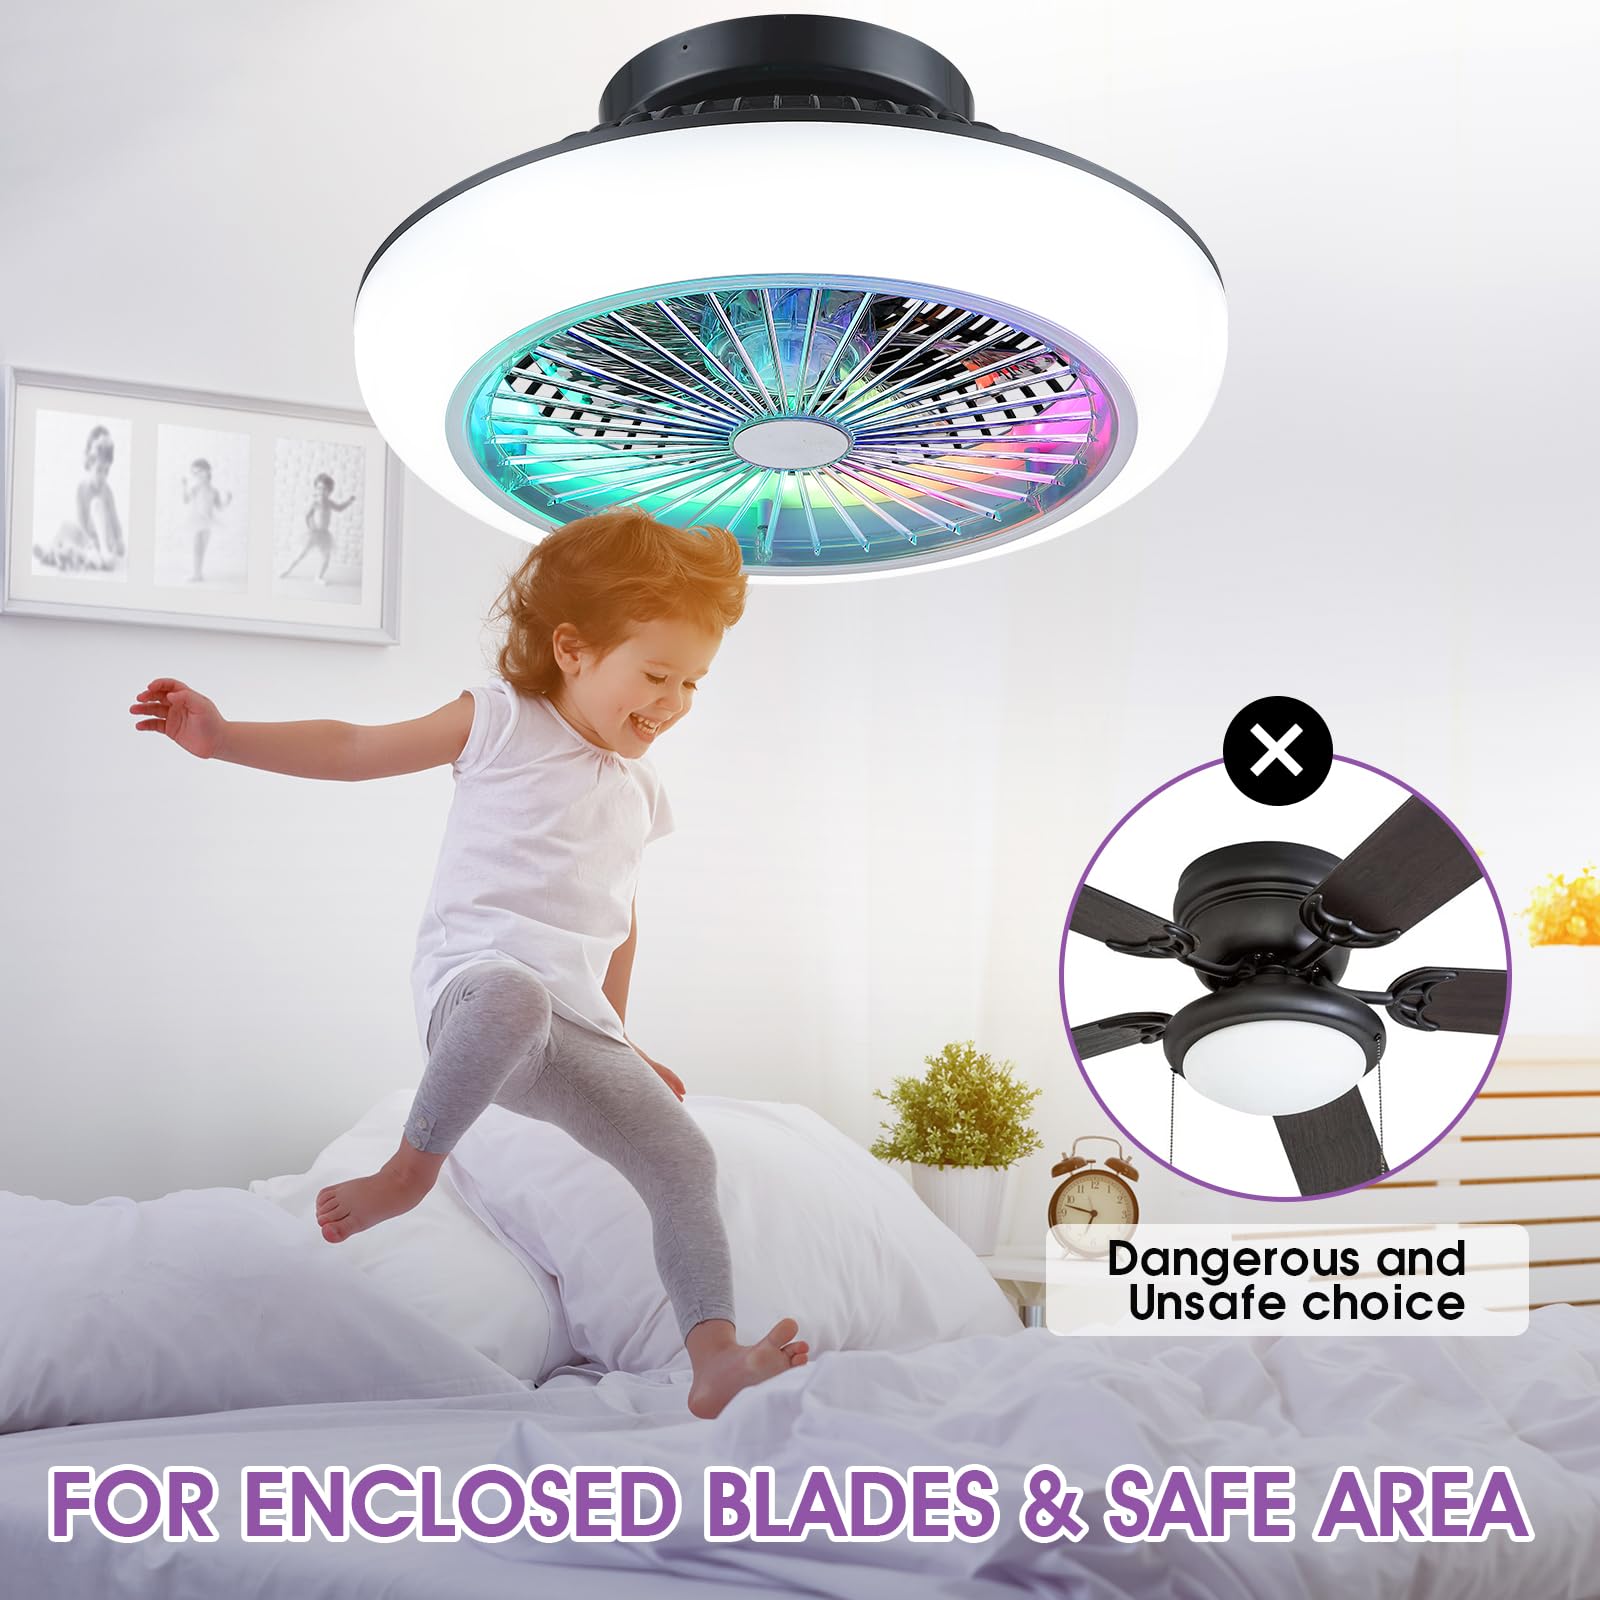 Surtime Bladeless Enclosed Ceiling Fans with Lights and Remote Control,20